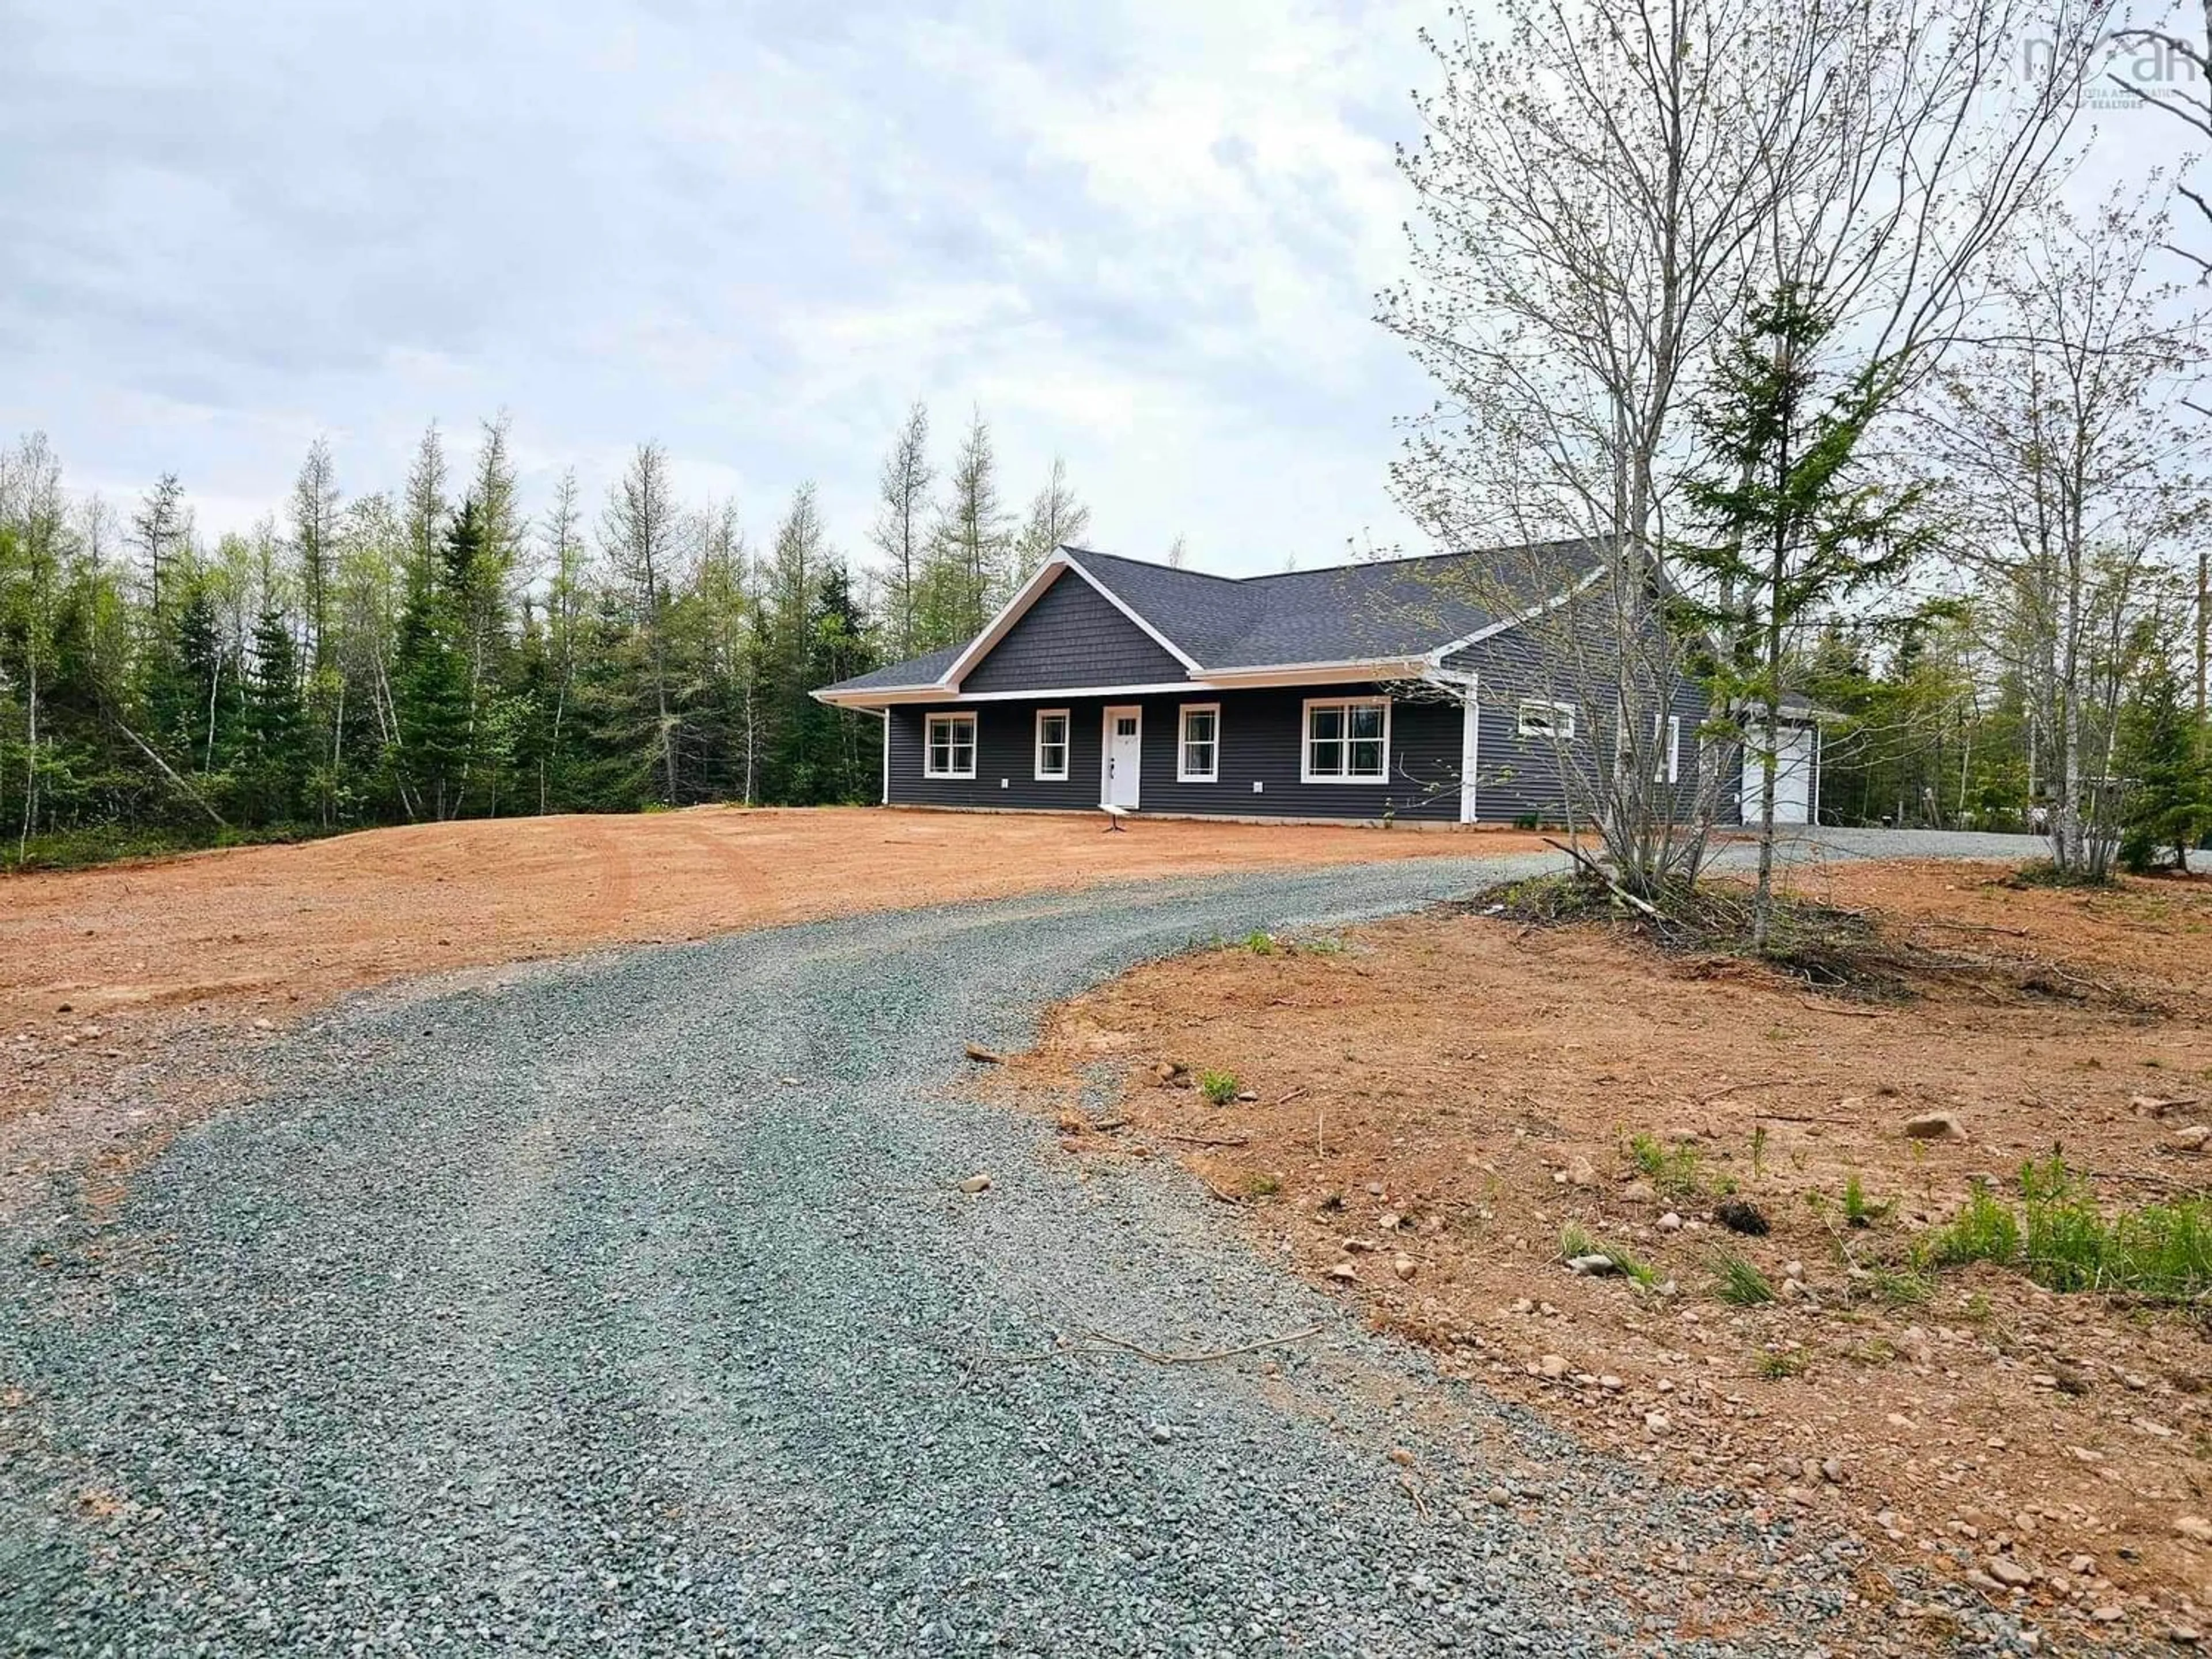 Cottage for 85 Old Tatamagouche Branch Rd, Onslow Mountain Nova Scotia B6L 6P5